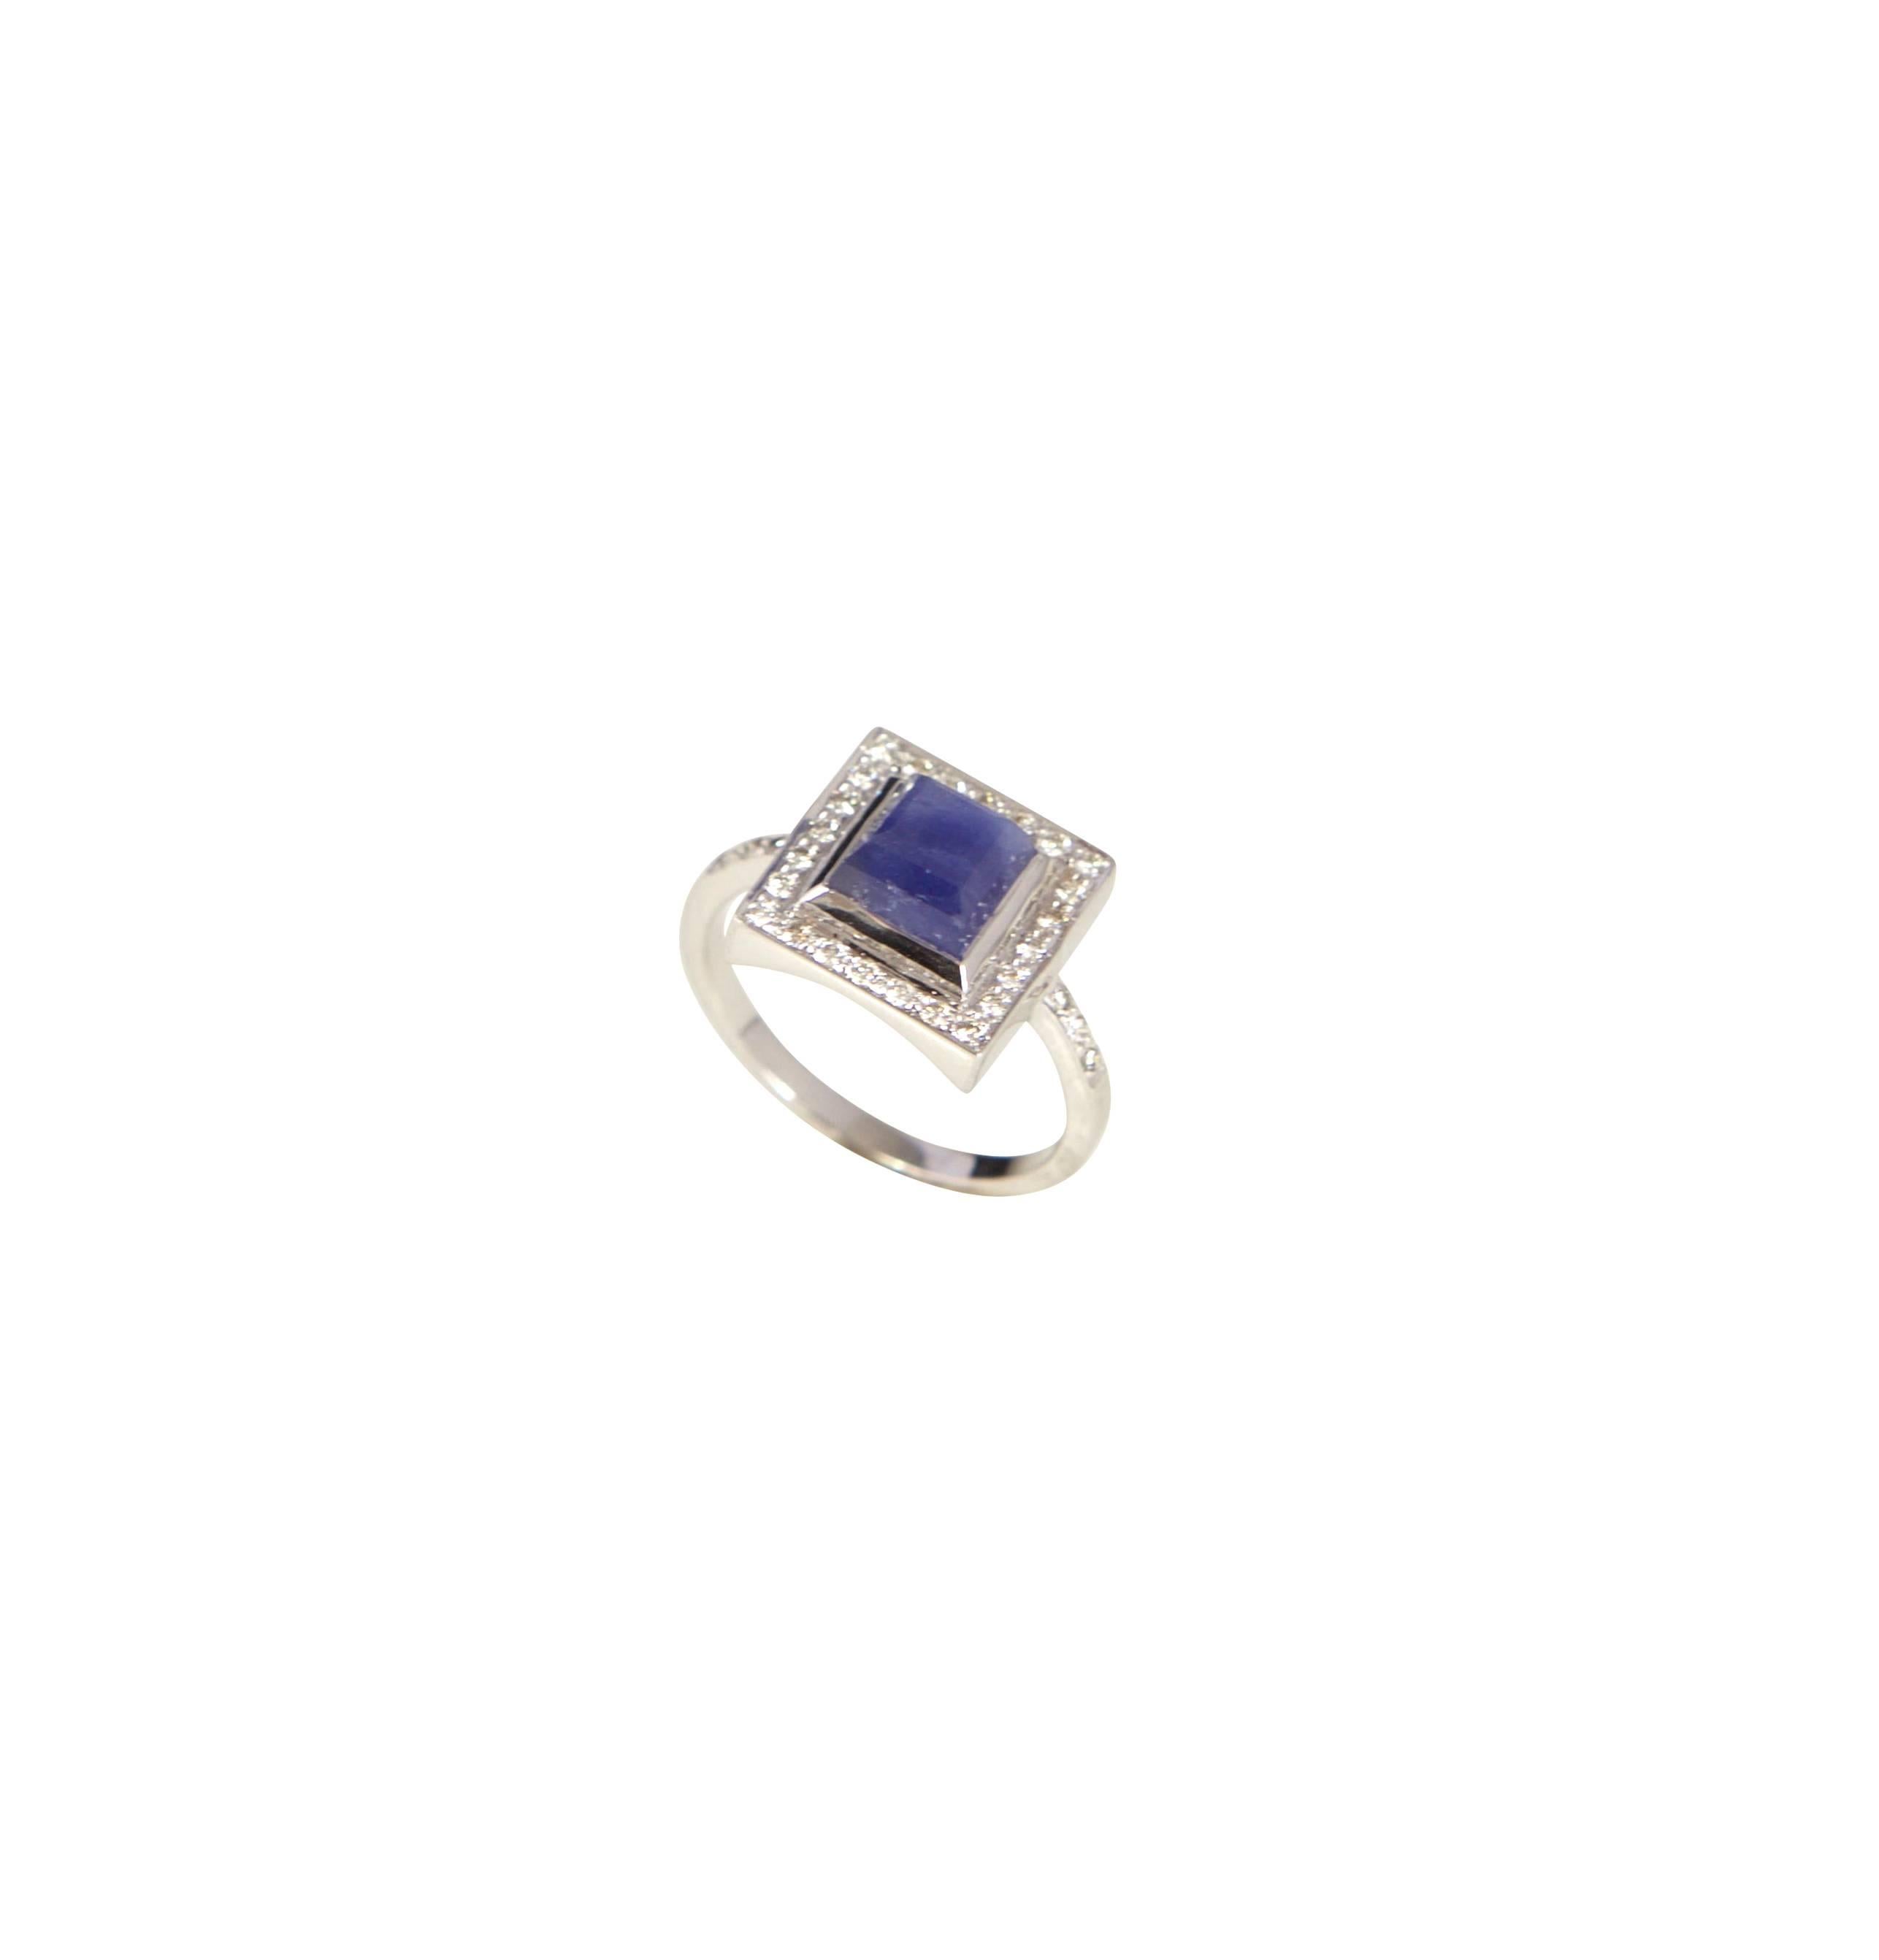 An elegant sapphire and diamond ring in 18k white gold from the new Neverending Romance Collection.

Sapphire - 2.36 ct                 
Diamond - 0.23 ct

